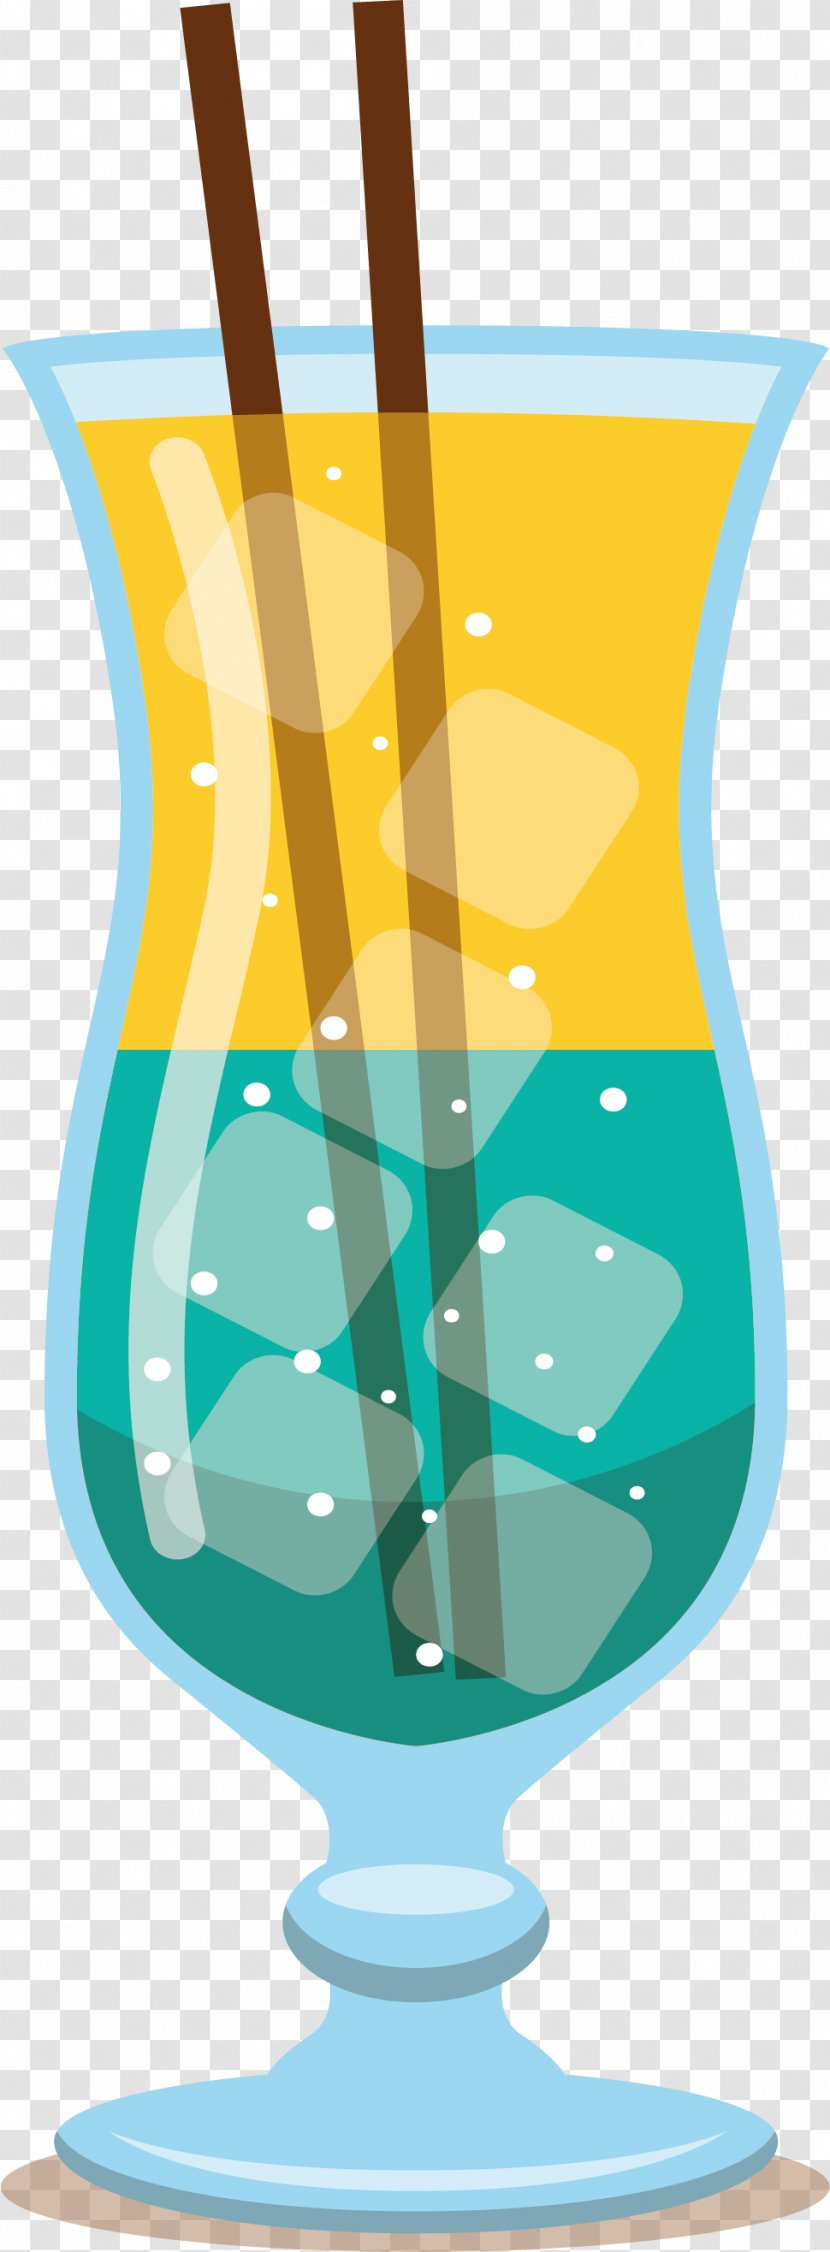 Cocktail Glass Ice - Lemon - Layered Colored Cocktails Transparent PNG